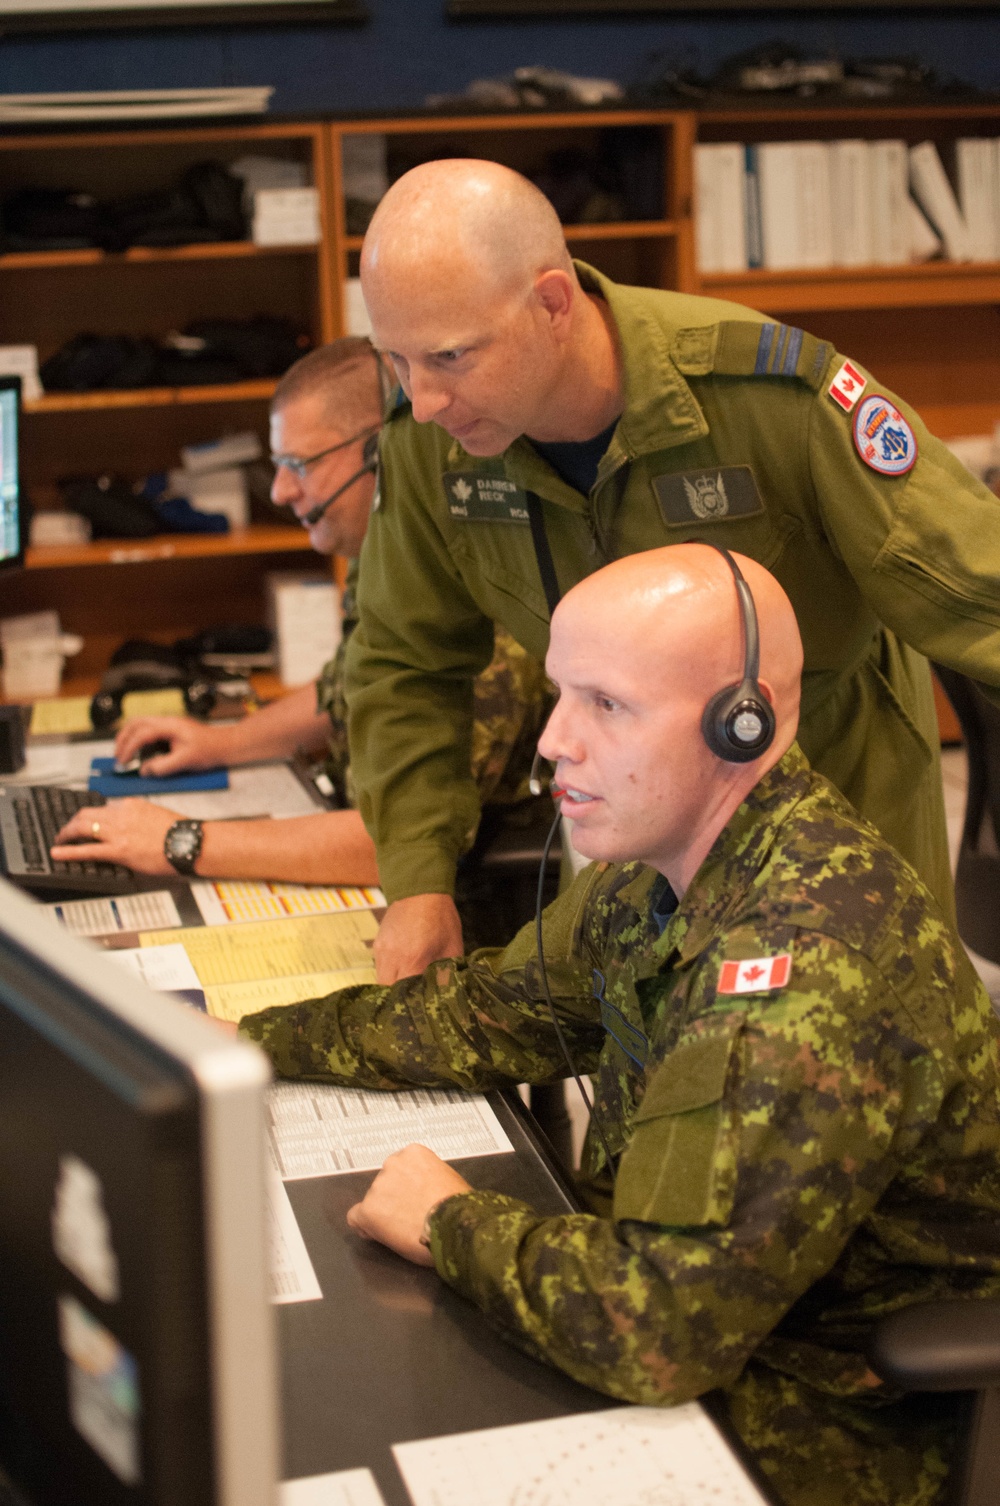 169TH AIR DEFENSE SQUADRON EXERCISES WITH INTERNATIONAL PARTNERS